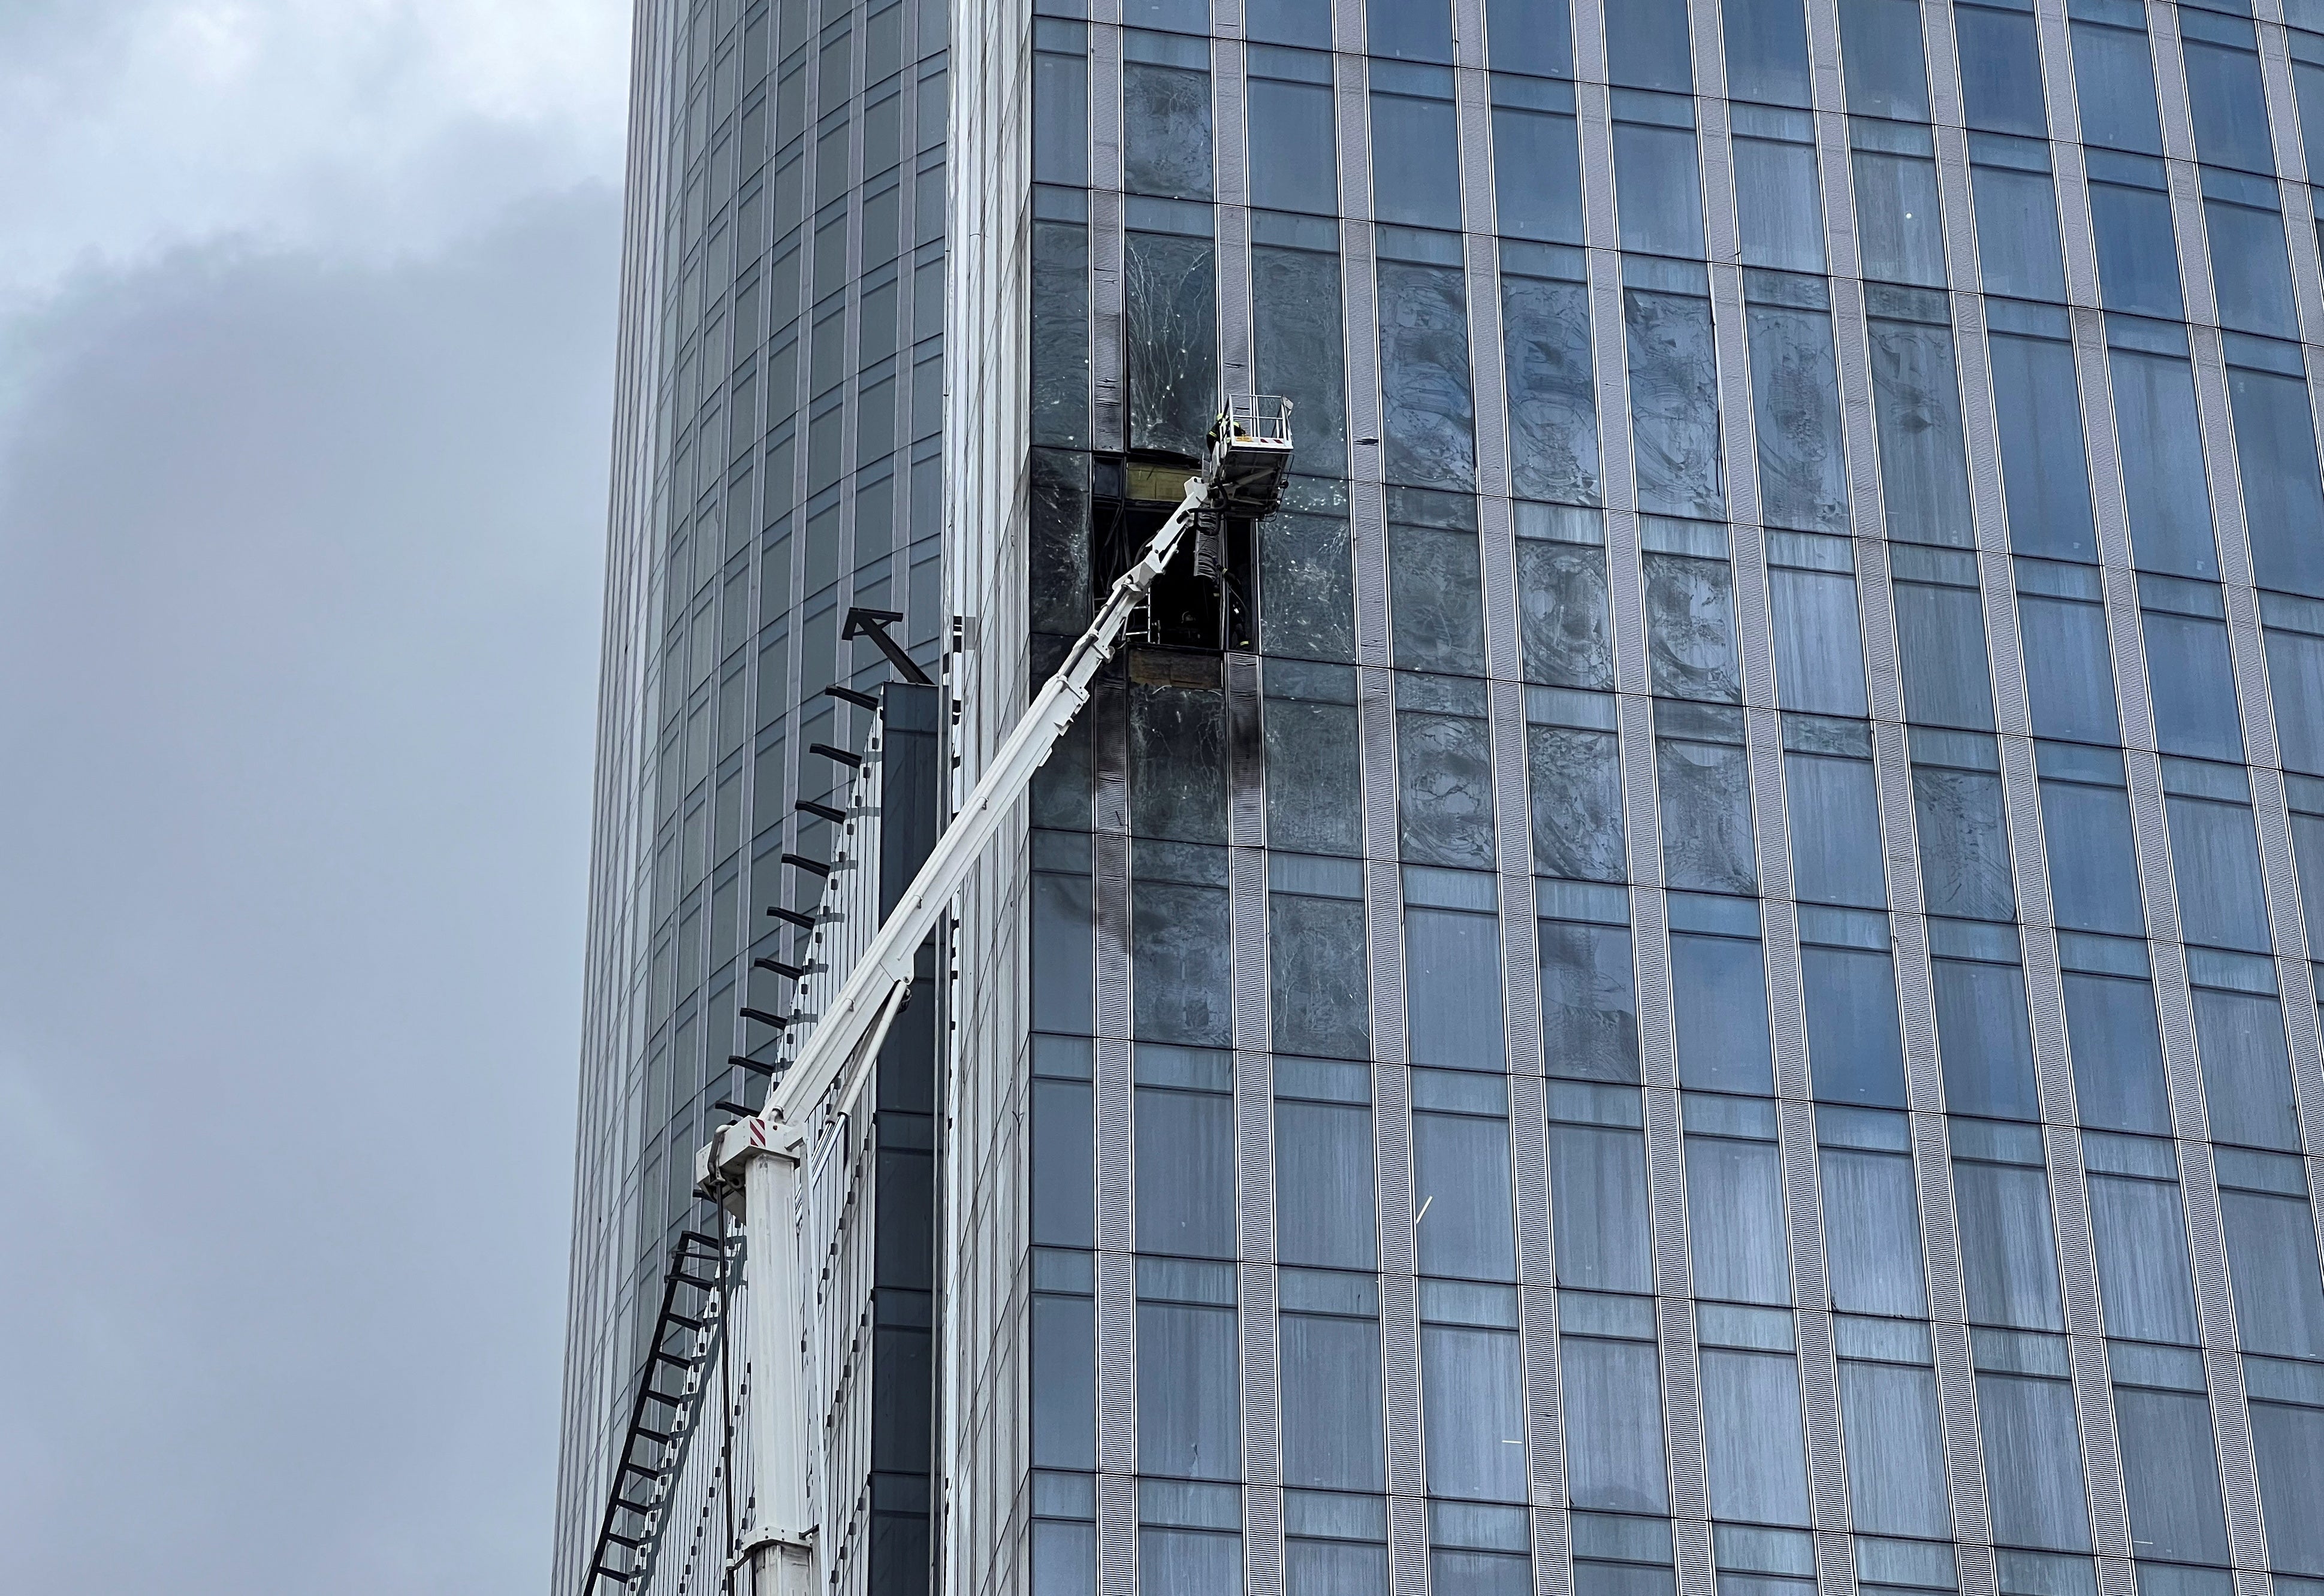 Damage to a high-rise building in Moscow, Russia, after a suspected Ukrainian drone hit it on 23 August